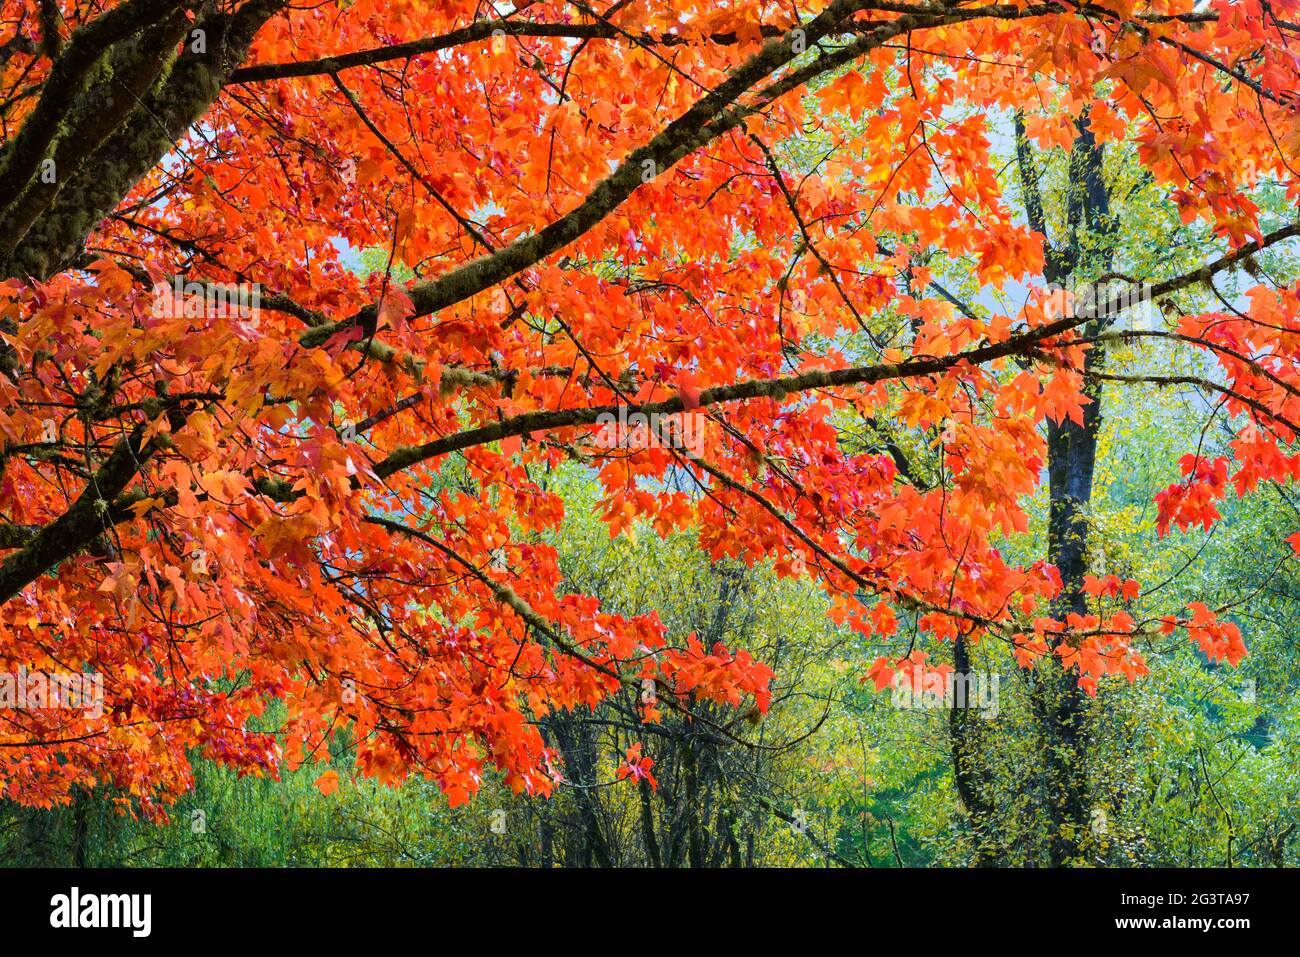 A tree in fall with red leaves stands in complimentary contrast to a background of green foliage Stock Photo